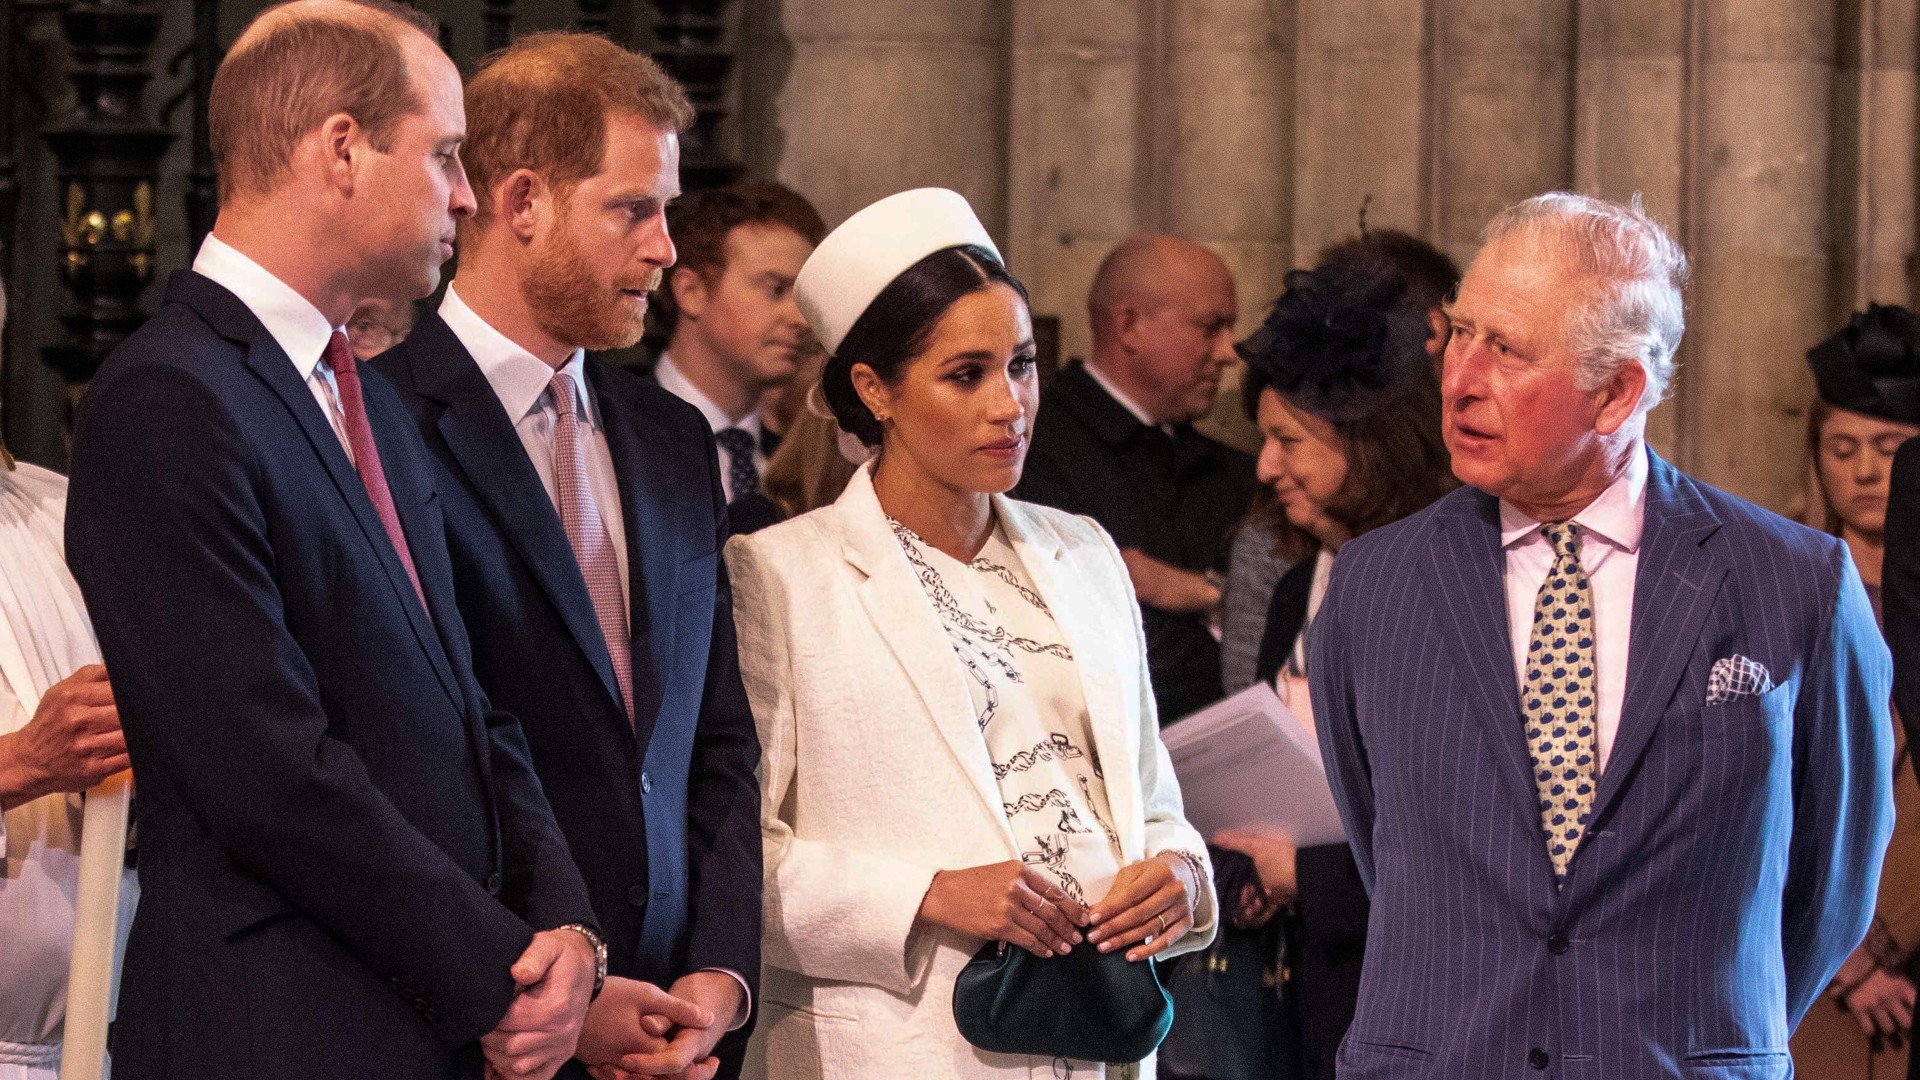 Meghan Markle Probably Declined to Stay With Prince Charles Because It Would Be Too "Awkward," Royal Expert Says